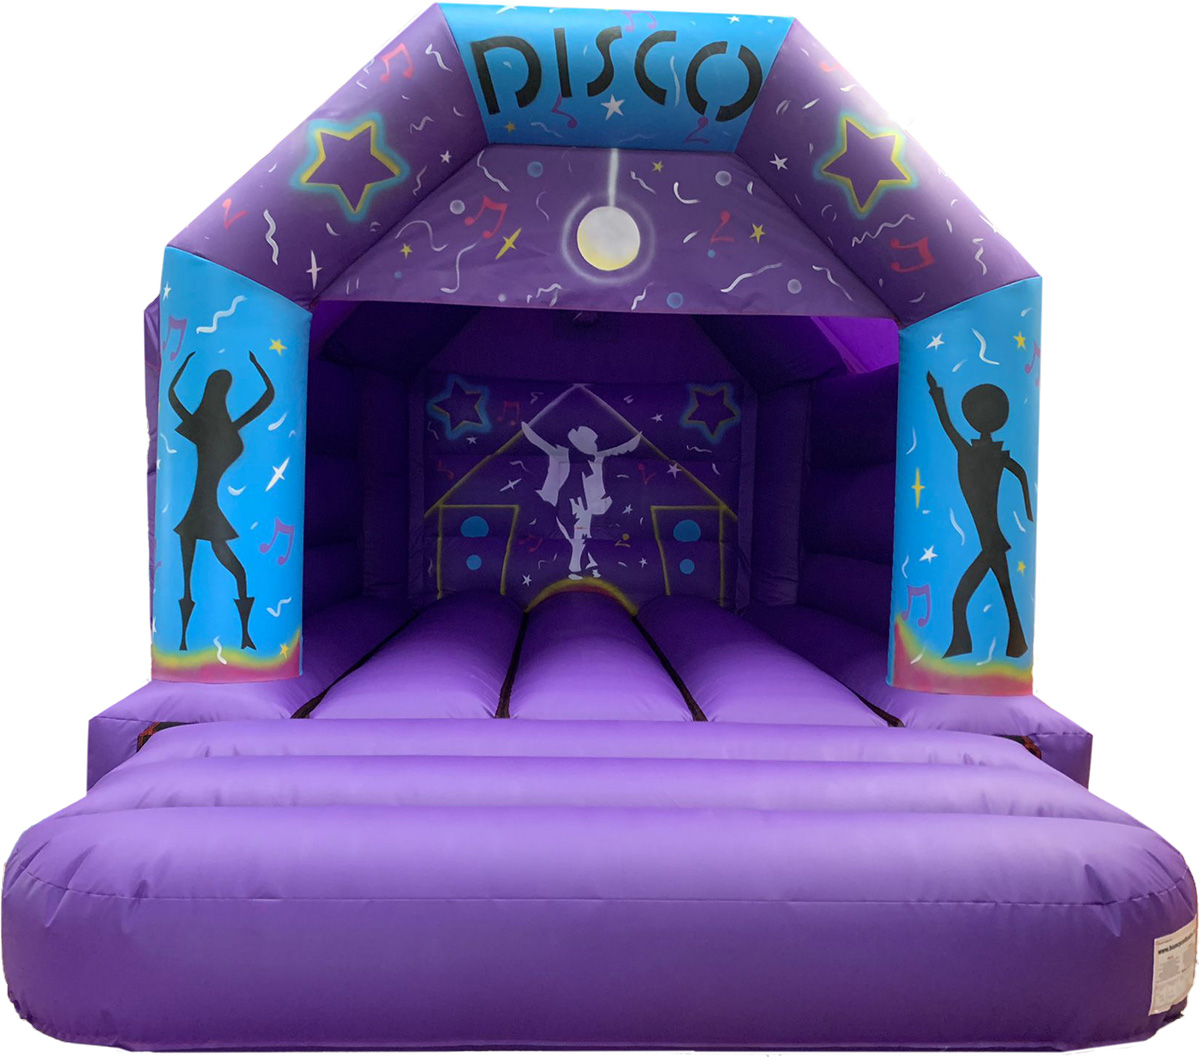 Bouncy Castle Sales - BC688 - Bouncy Inflatable for sale